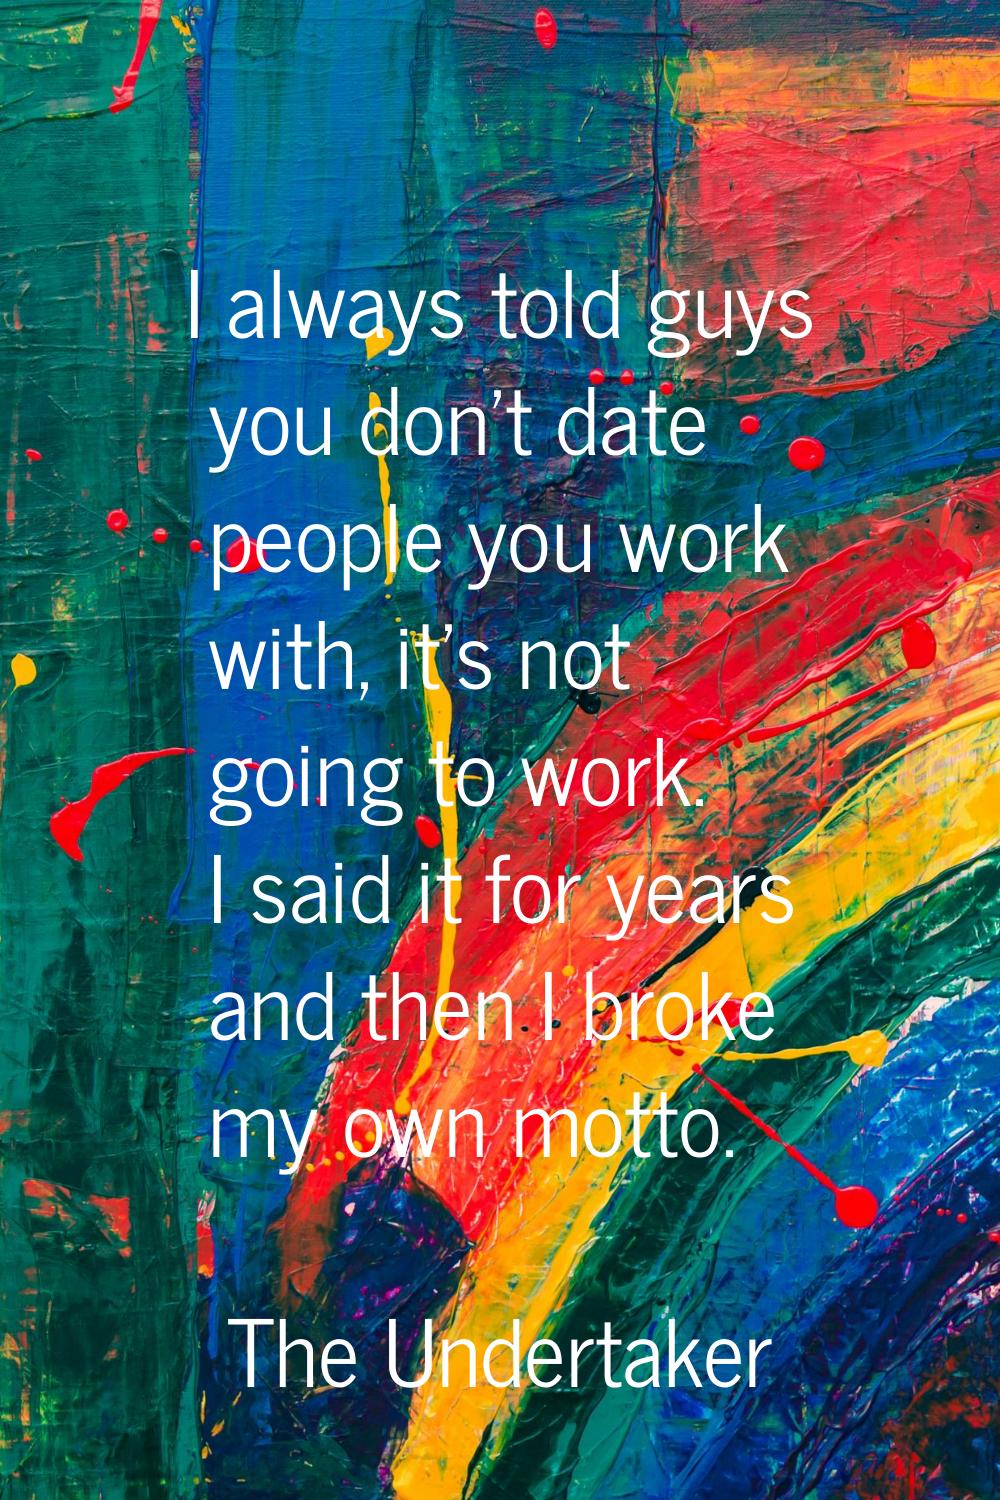 I always told guys you don't date people you work with, it's not going to work. I said it for years